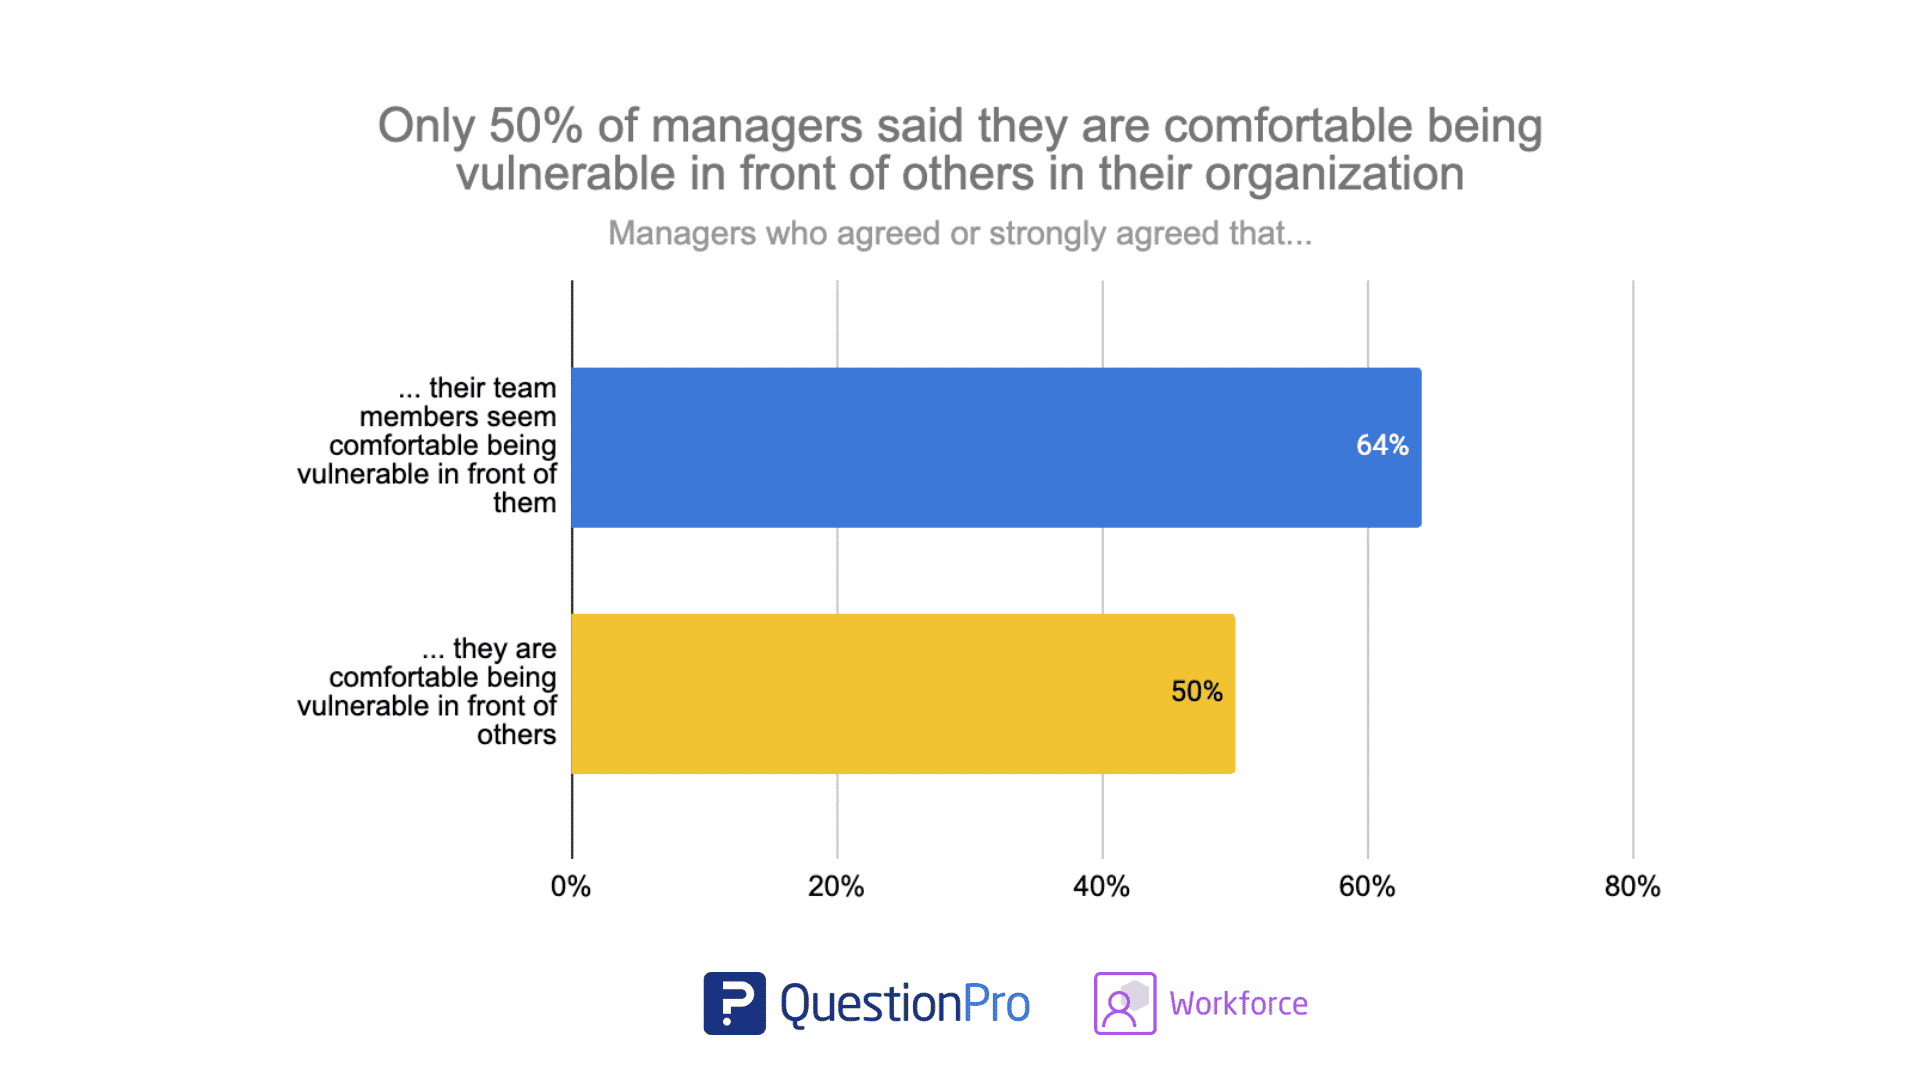 Vulnerability in the Workplace for Managers and person experience managers